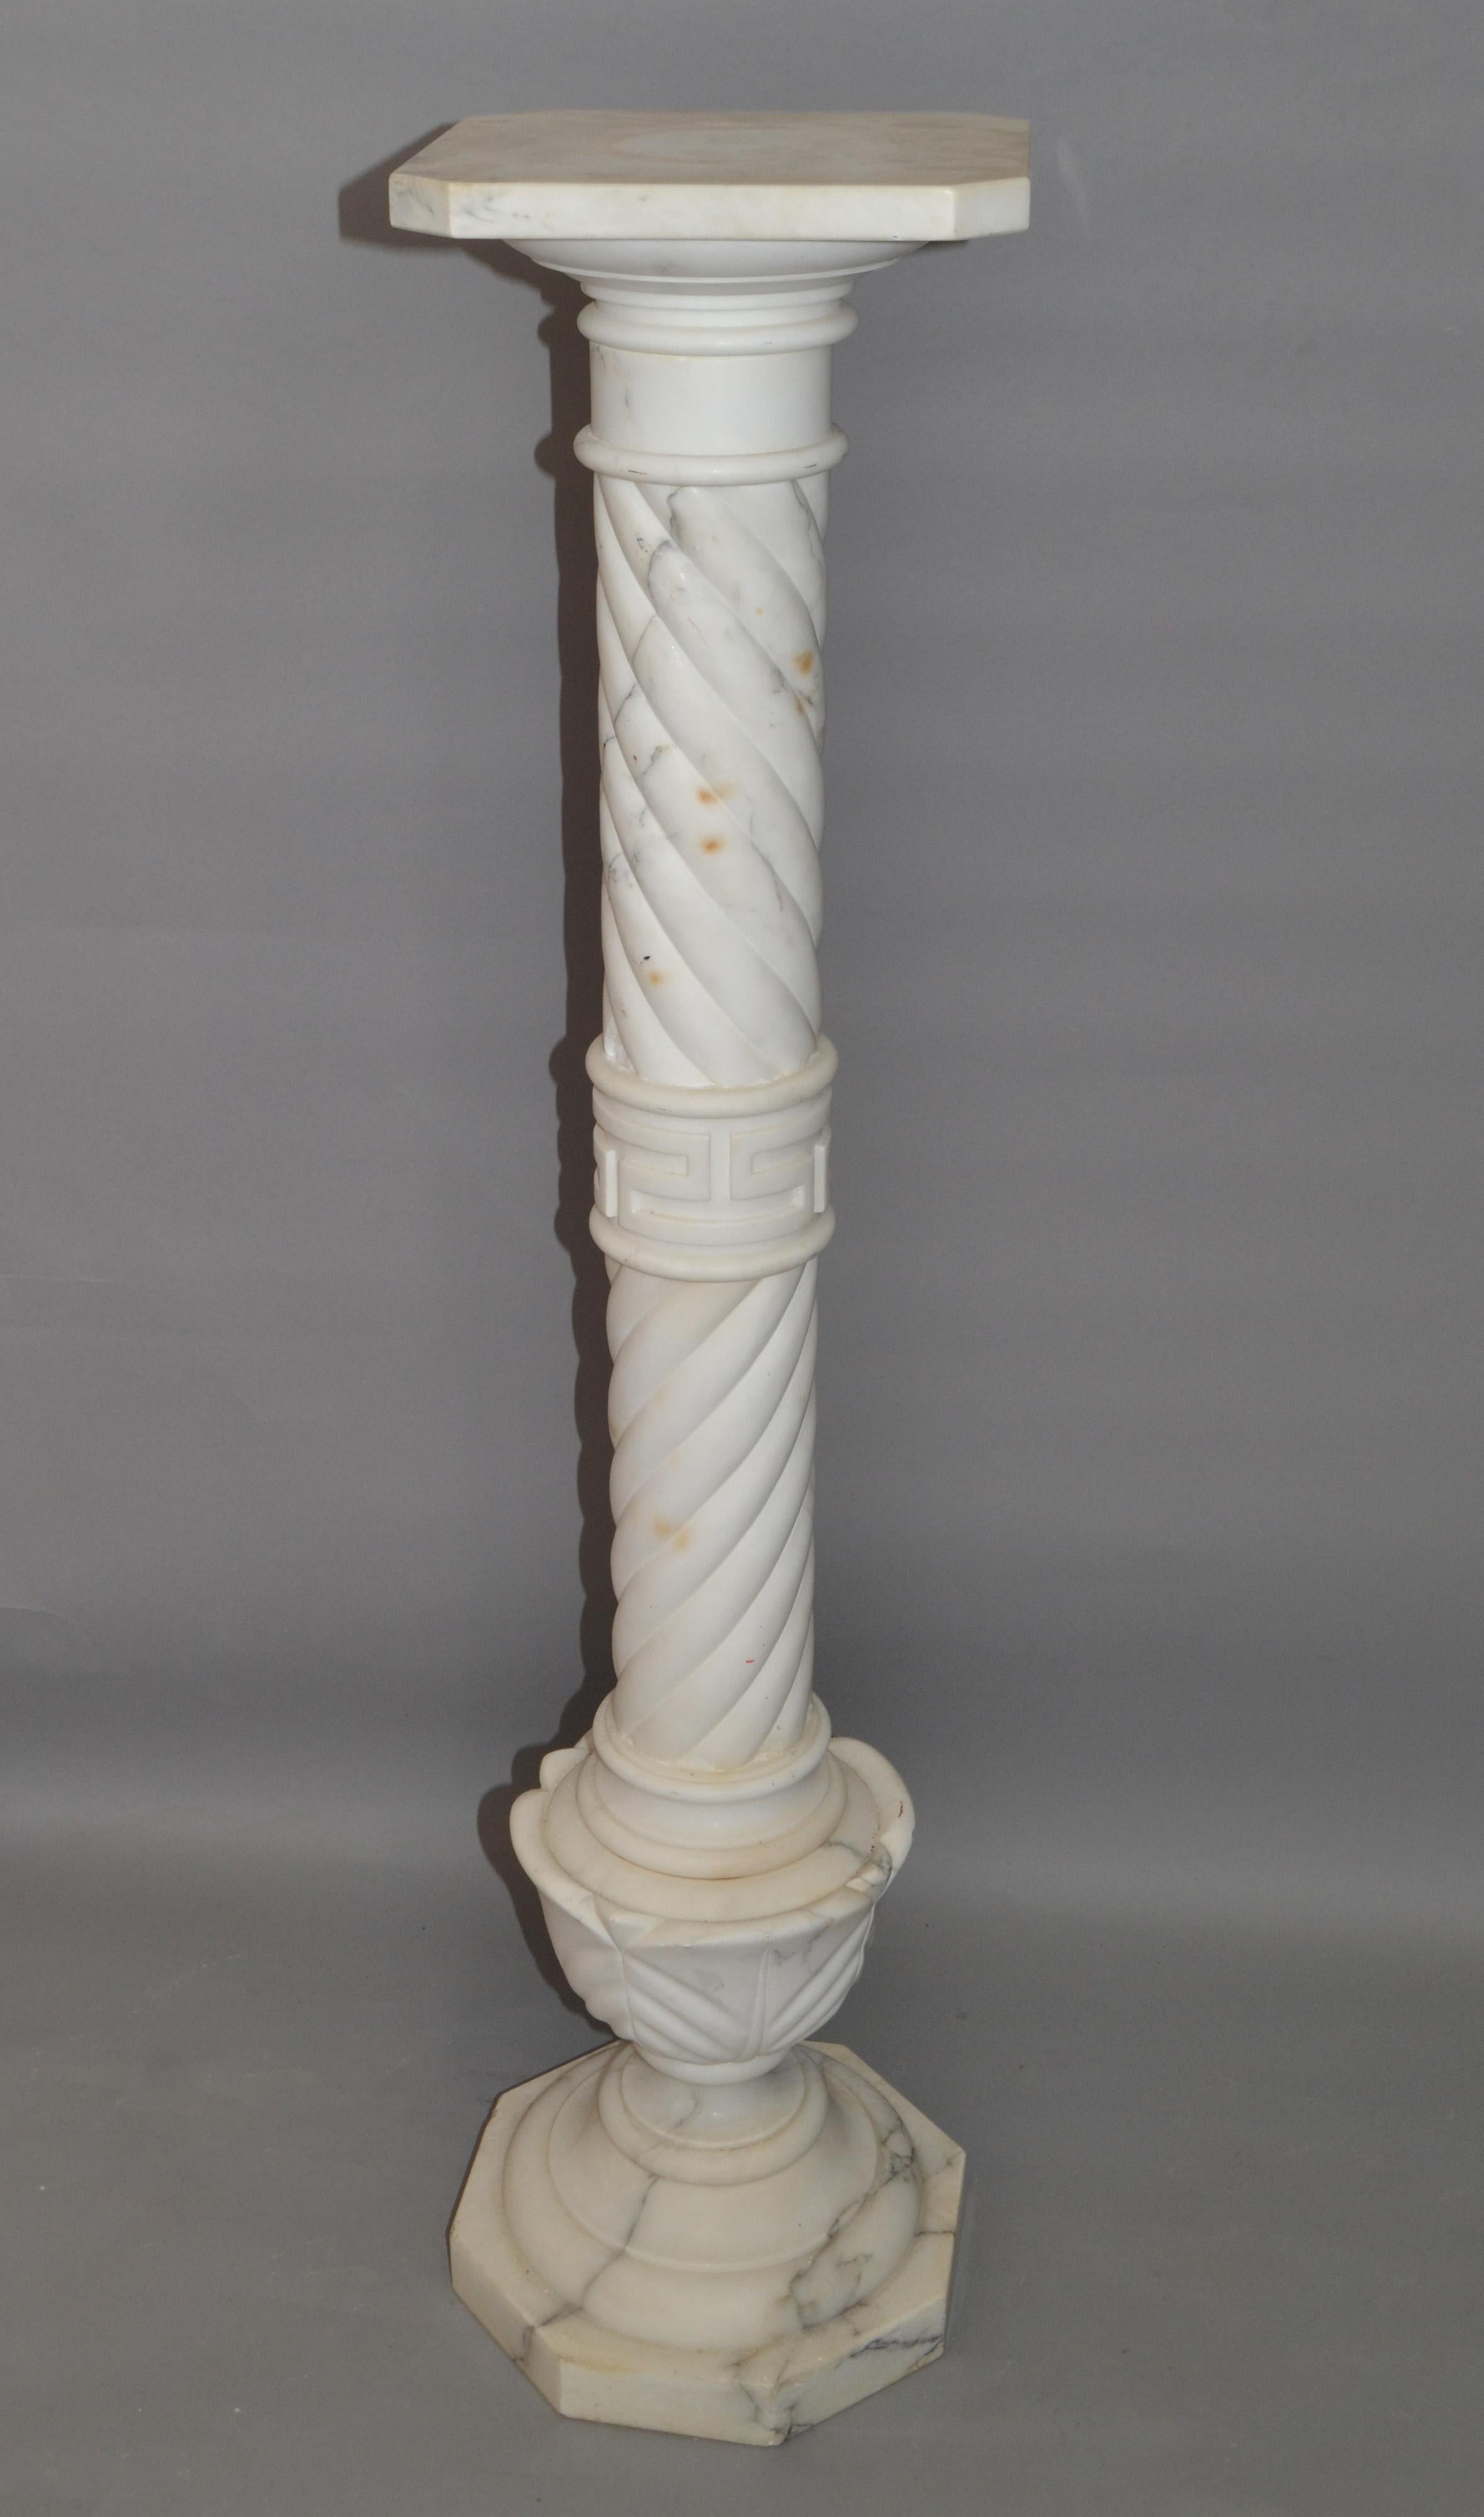 Mid-20th Century Neoclassical Carrara Marble Pedestal Table, Sculpture Stand or Column Italy 1950 For Sale